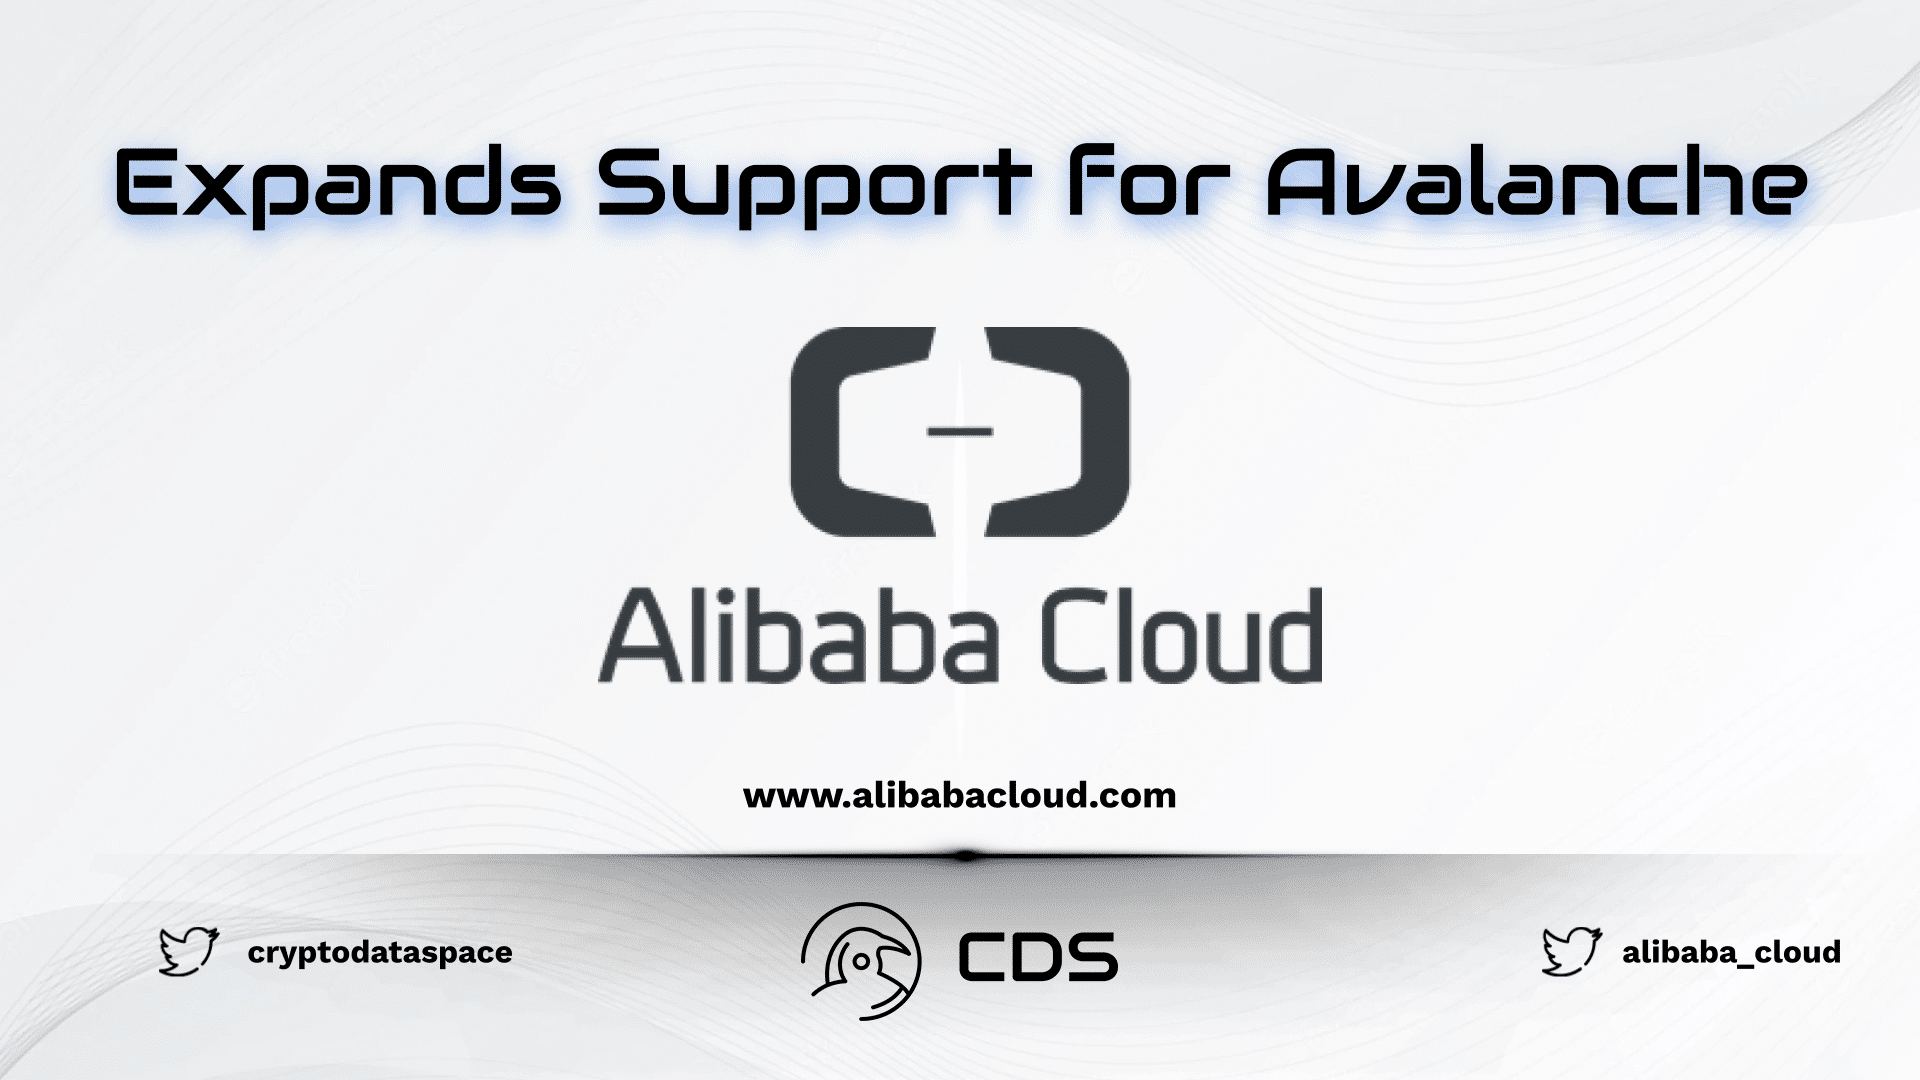 Alibaba Cloud Expands Support for Avalanche